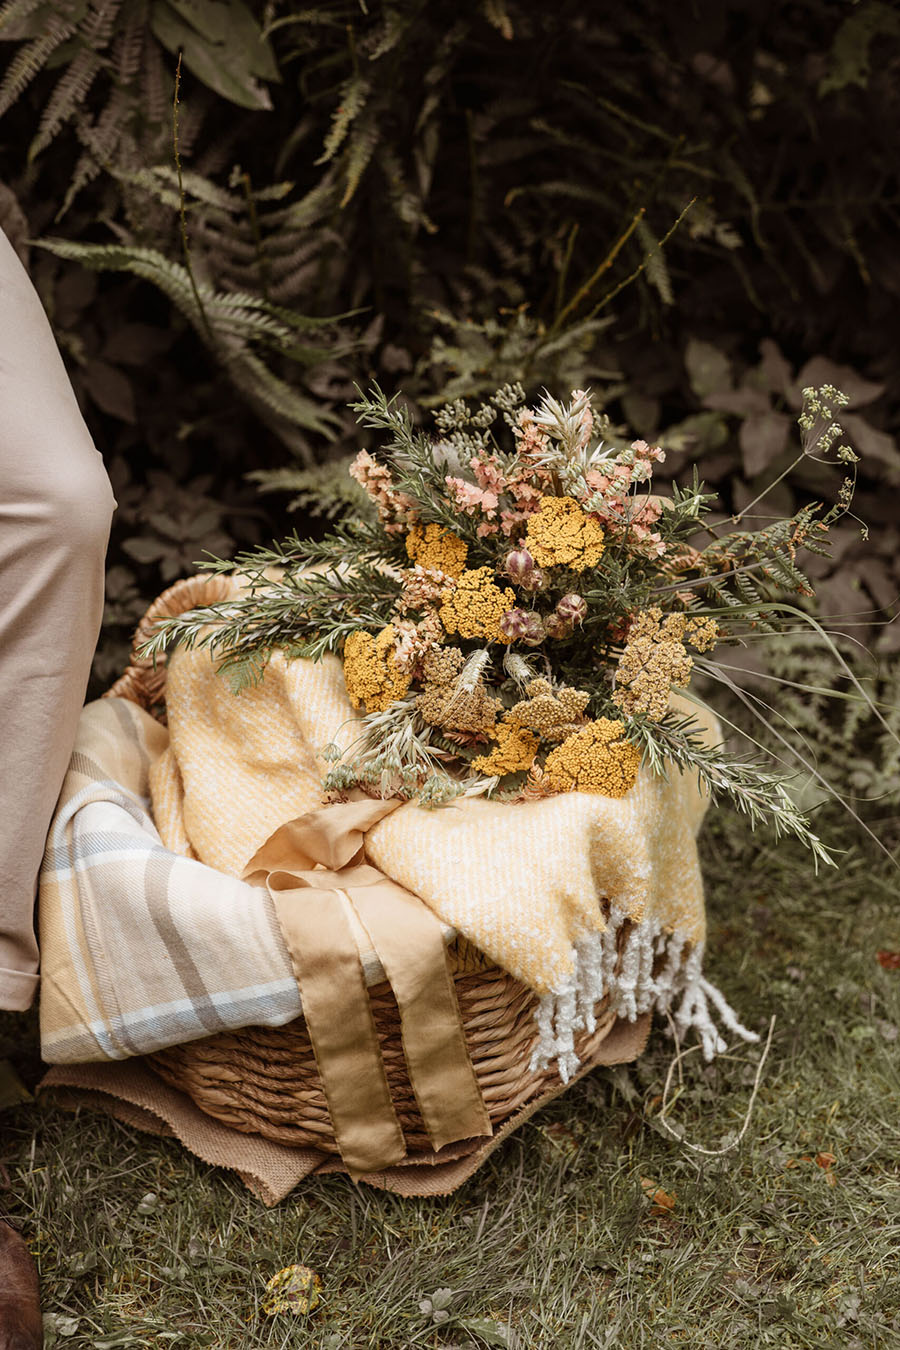 Yellow autumnal floral bouquet in a basket full of cosy blankets. Photographer credit Sarah Hoyle, styling by Amethyst Weddings